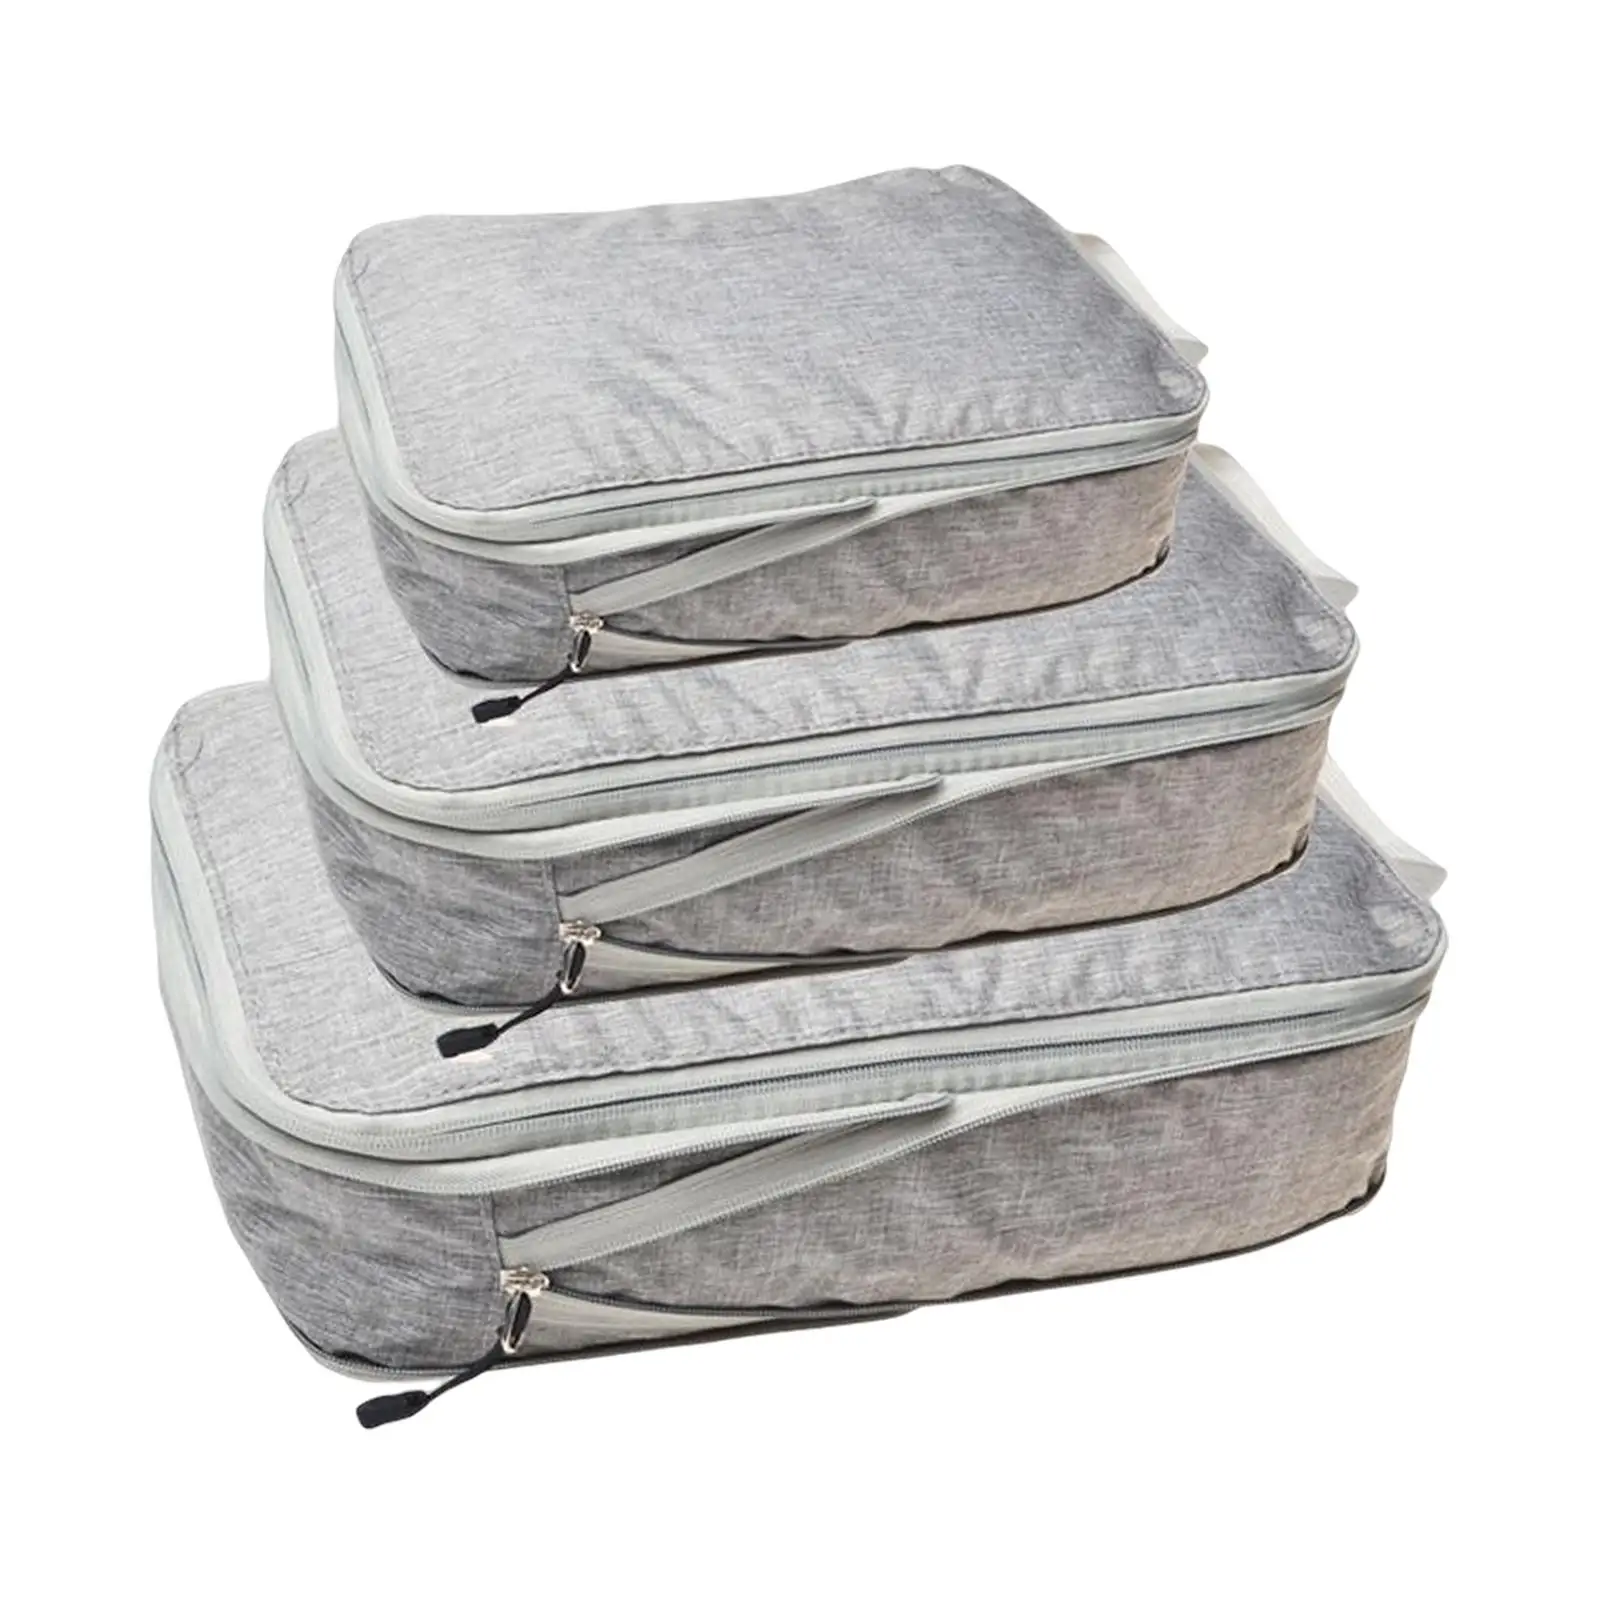 3 Pieces Waterproof Luggage Organiser Lightweight Clothes Storage Bags